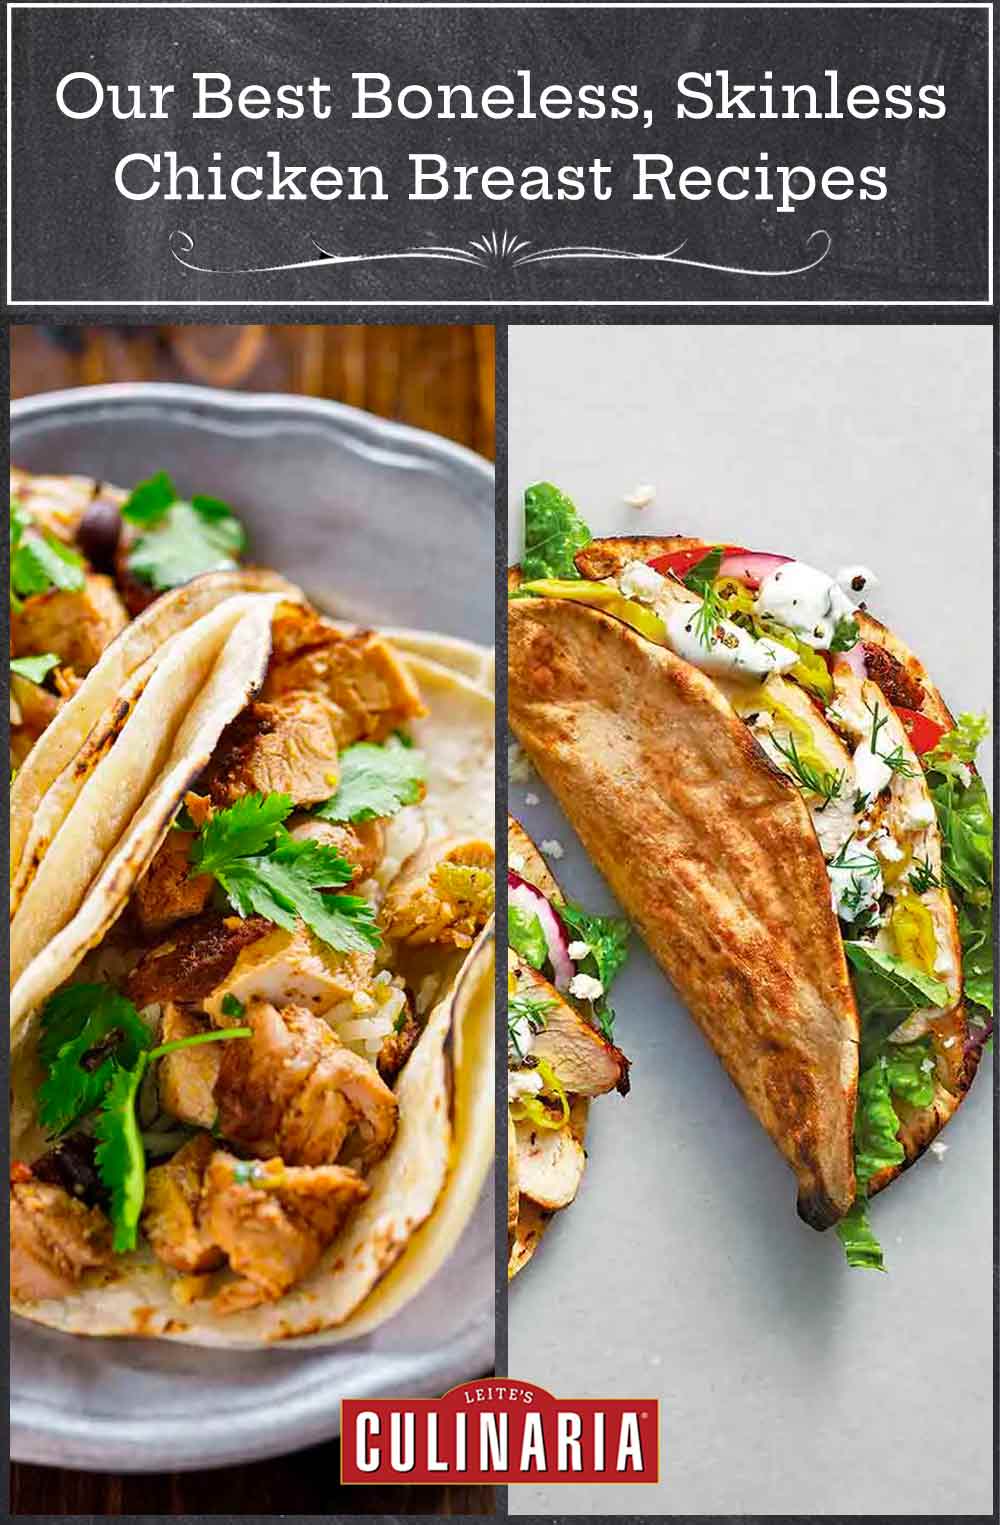 Images of two of the 14 boneless skinless chicken breast recipes -- tequila lime chicken tacos and chicken gyros.